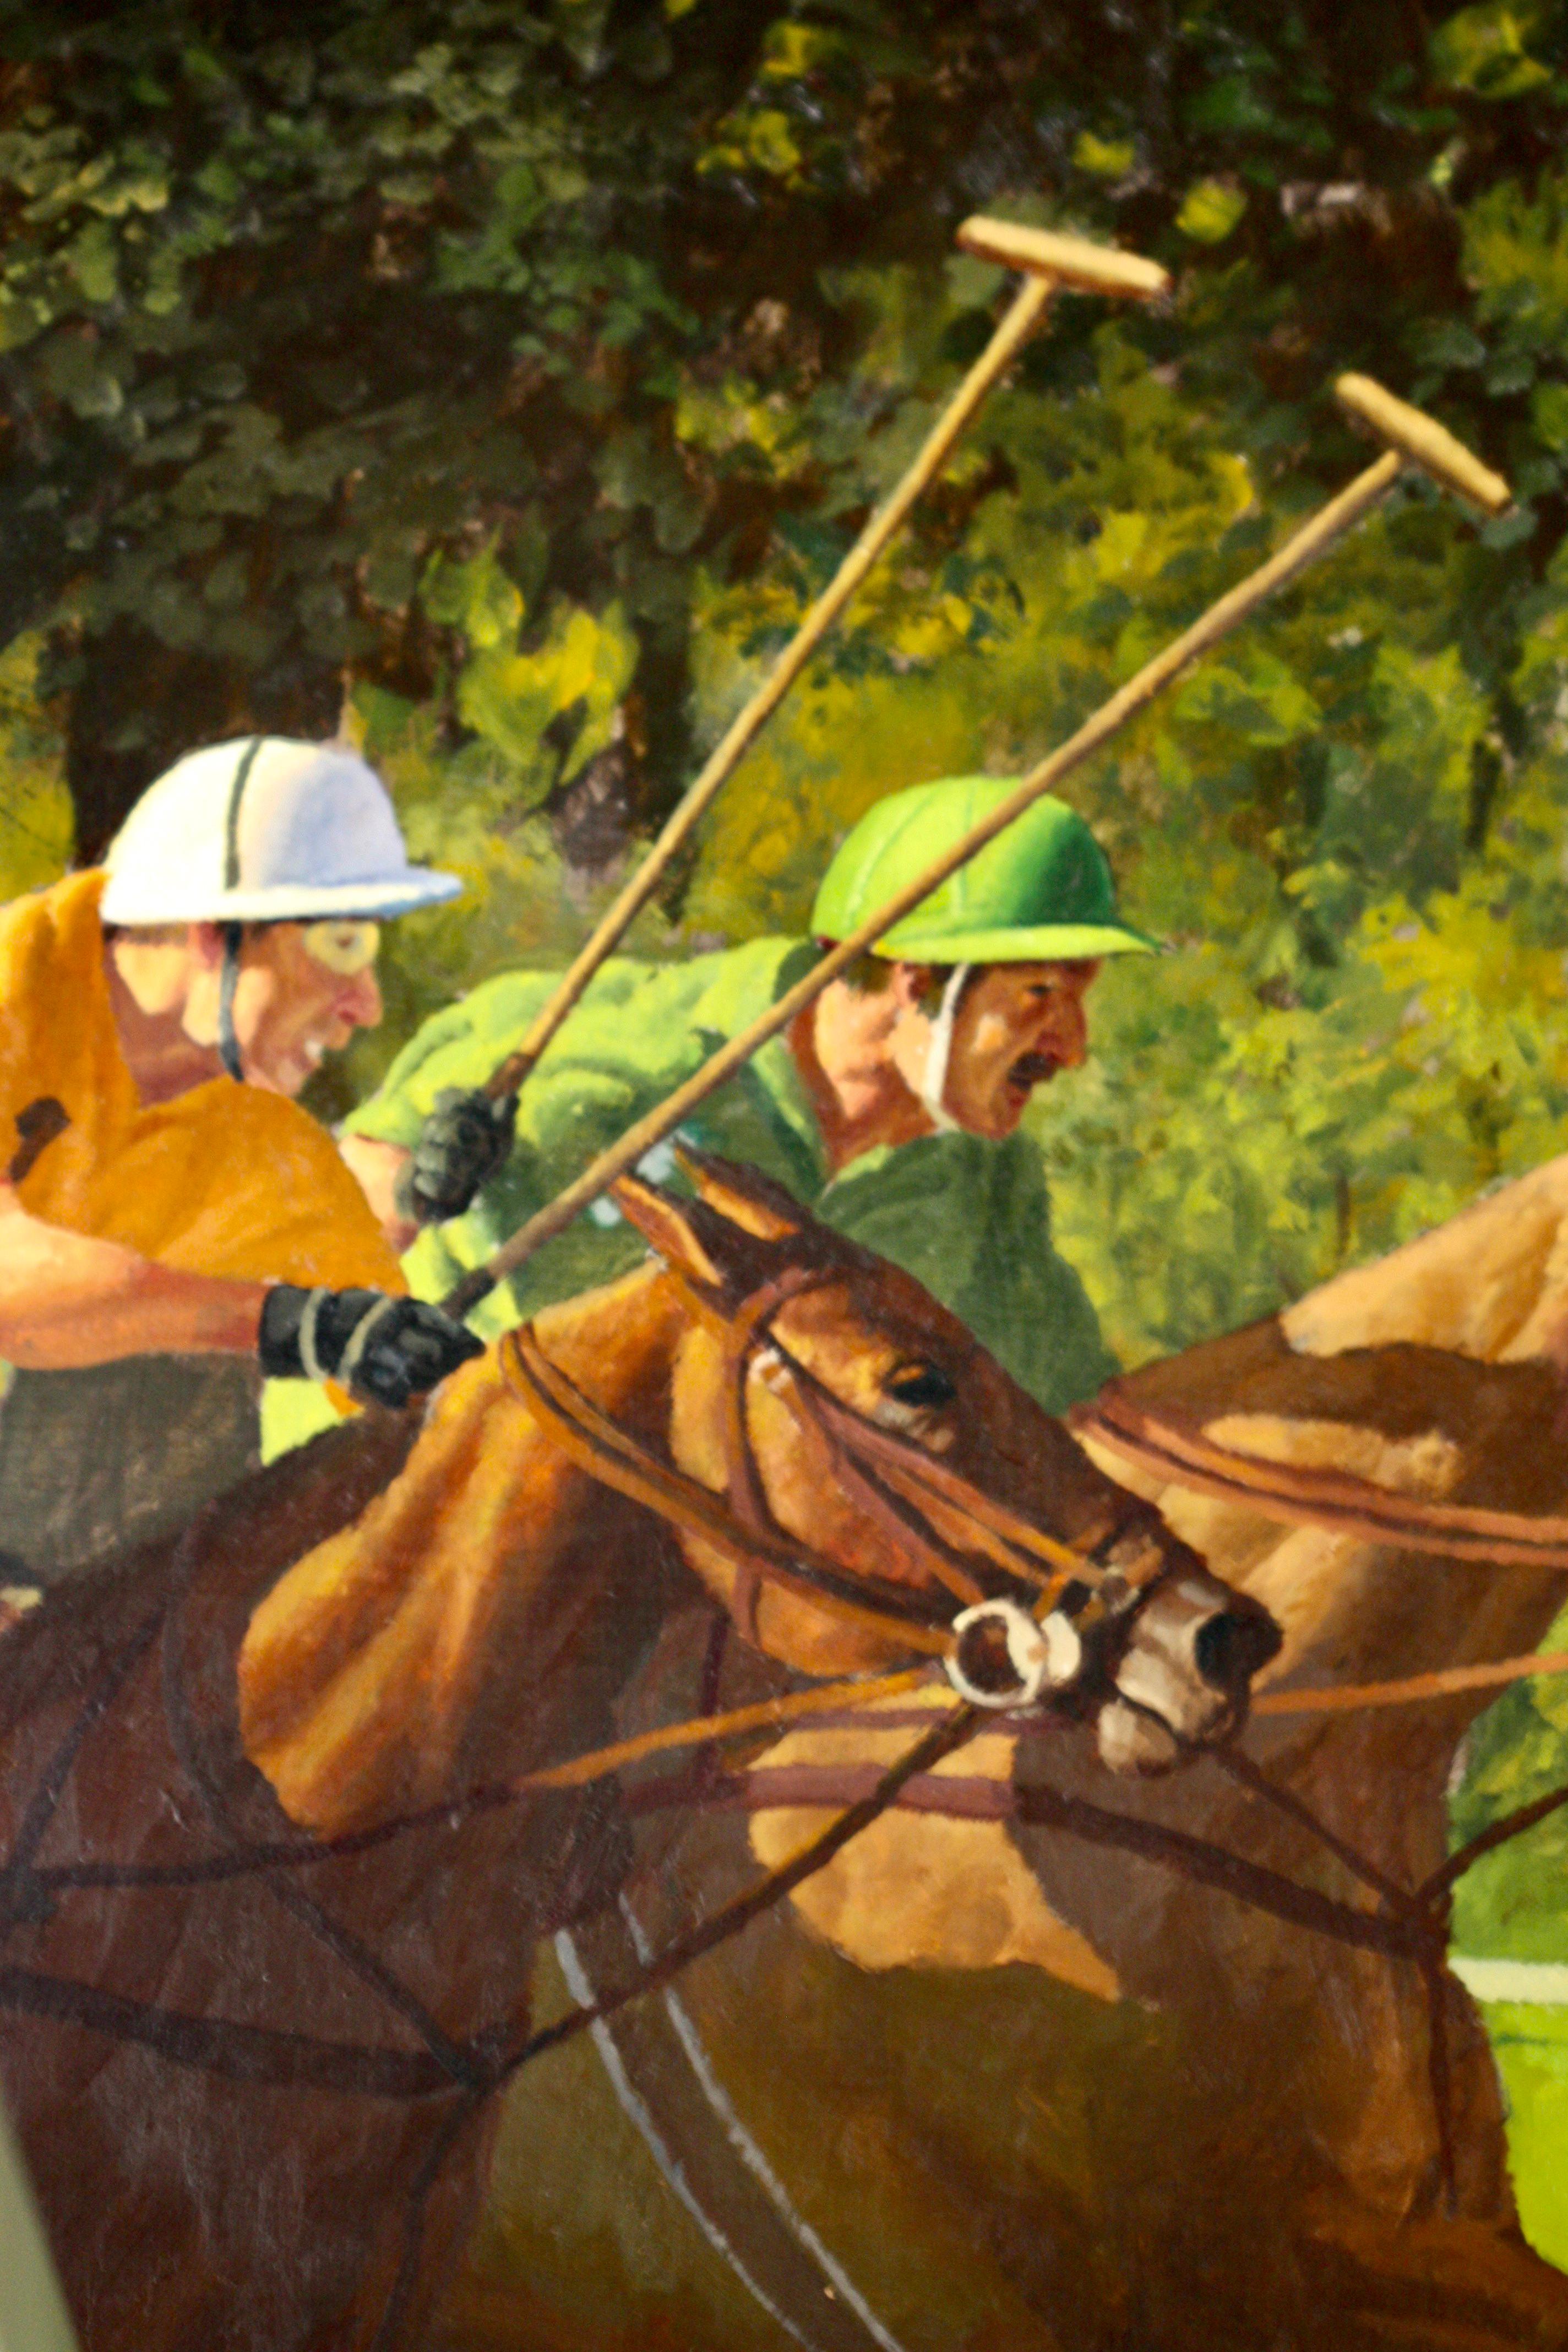 John Leone (1929-2011)
Last Chukker
Signed John Leone (lower right)
Oil on Masonite
Size with frame 47.5 x 67.375 in. (120.65 x 171.13 cm.)
Unframed 39.5 x 59.75 in. (100.33 x 151.76 cm.)
Painted in 2010
Provenance: Wally Findlay Gallery,